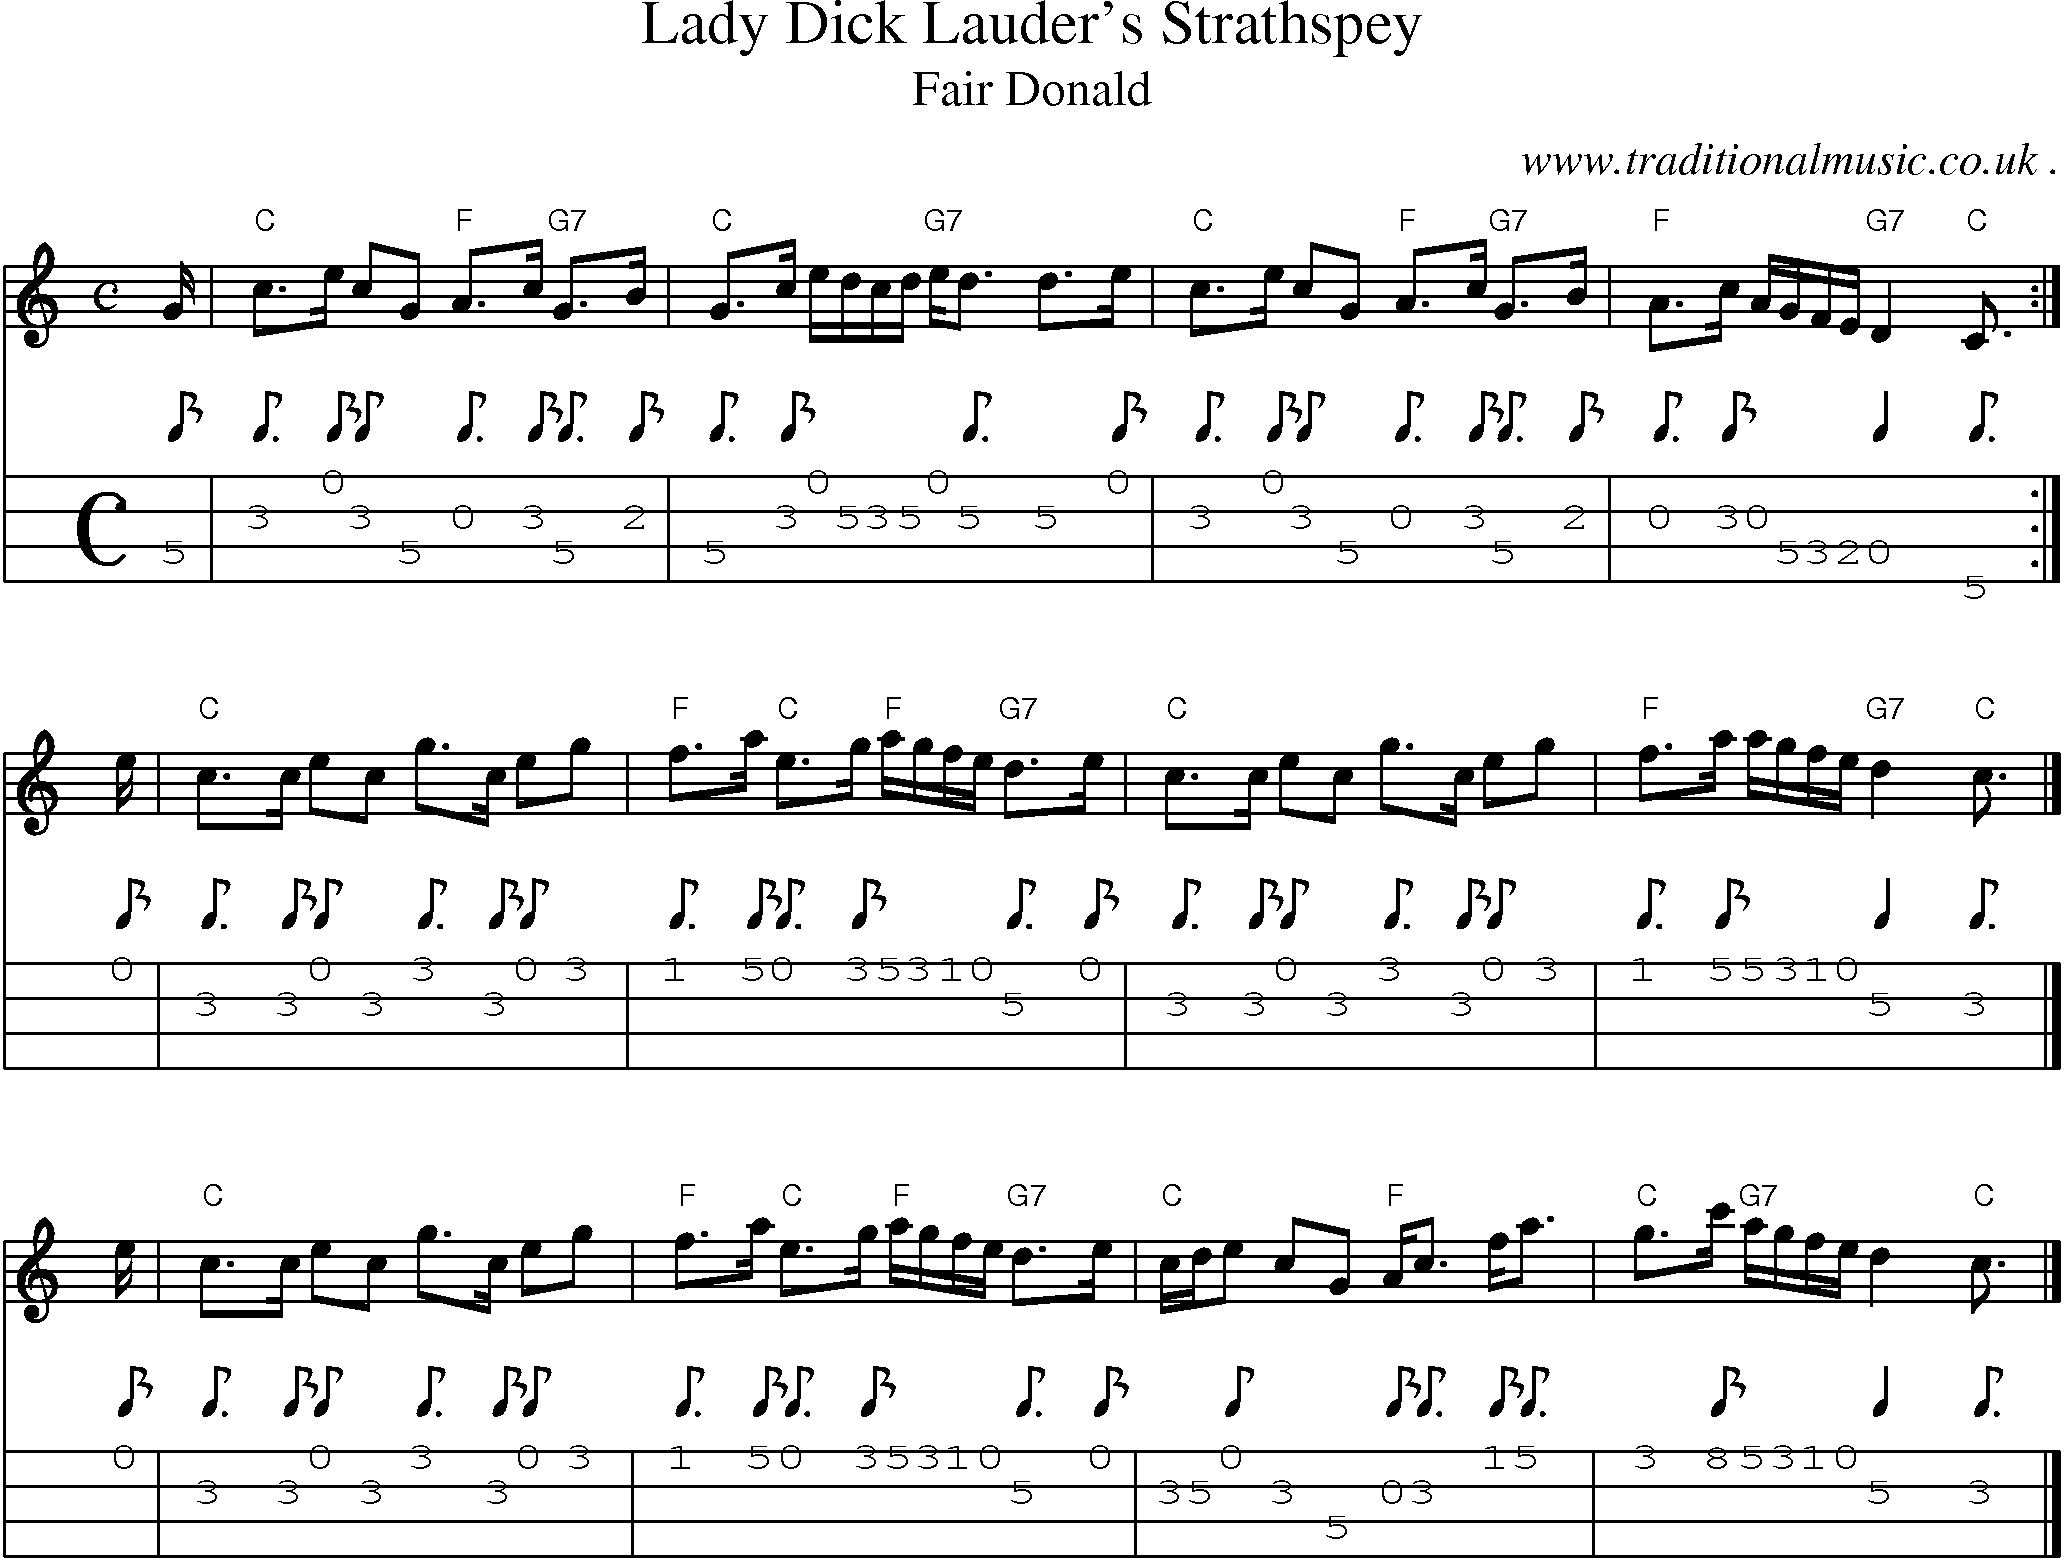 Sheet-music  score, Chords and Mandolin Tabs for Lady Dick Lauders Strathspey